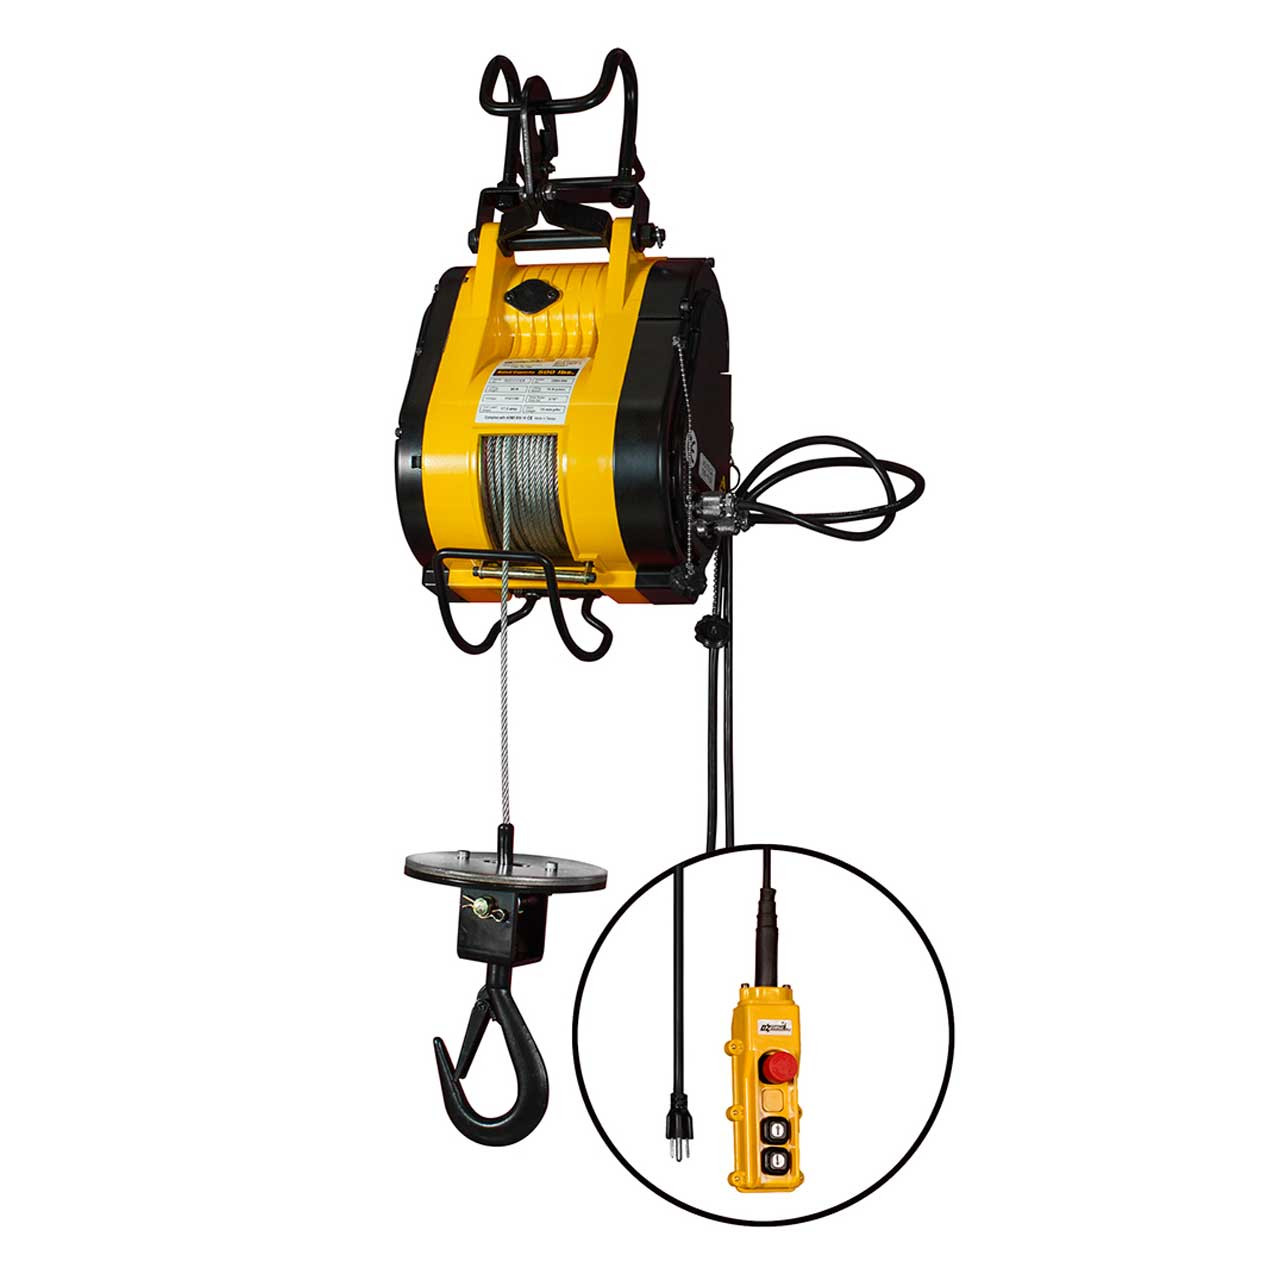 OZ Electronic Builder's Hoist 110 AC Electric, Load Capacity 500 lbs, OBH500